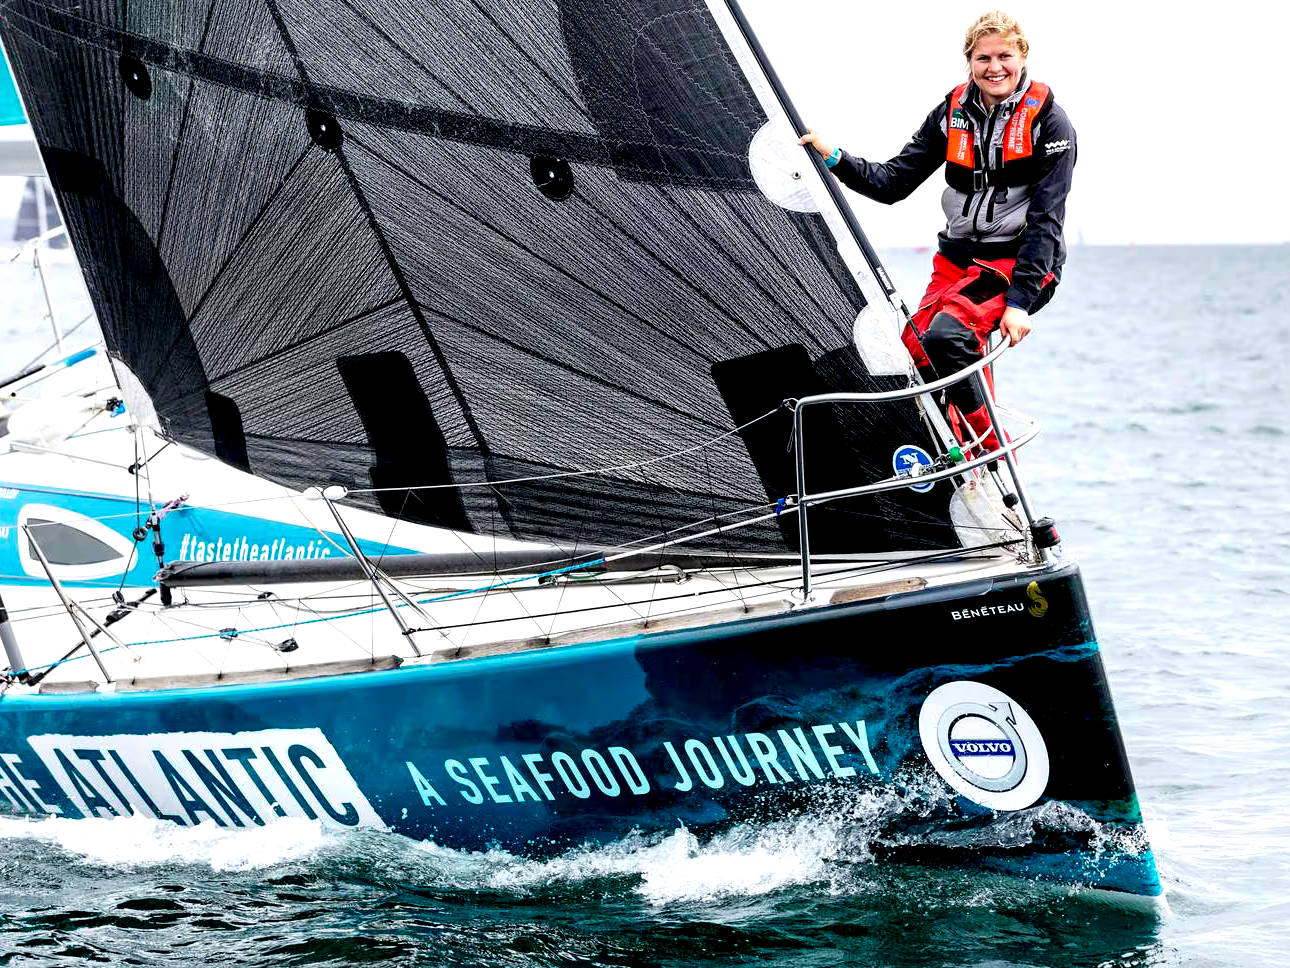 STOP PRESS: In July 2023, Joan Mulloy signed up for a Jules Verne Trophy attempt in 2025, joining Alexia Barriers all-female crew as they bid to secure the fastest lap of the planet under sail. The boat secured for their project is the current record holder that sailed as IDEC under Francis Joyon, formerly Banque Populaire.